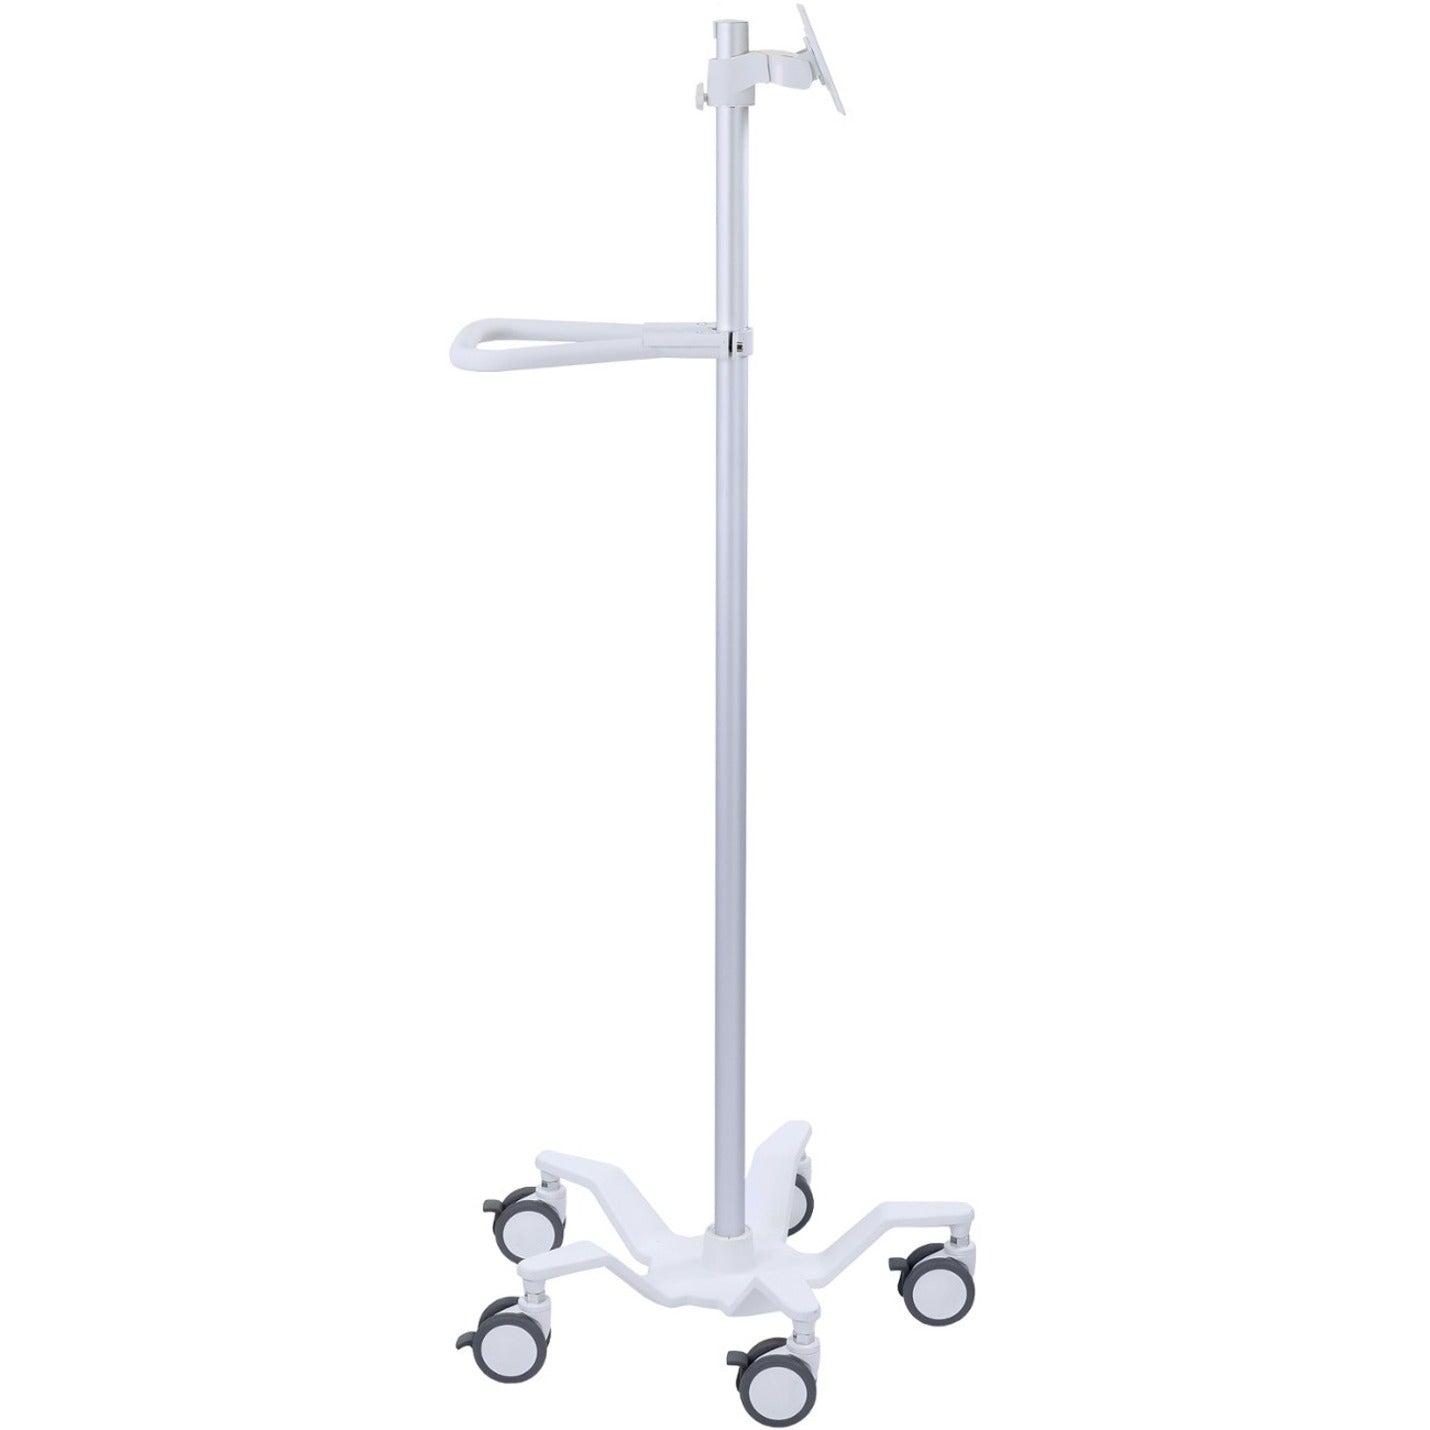 Ergotron 24-818-211 StyleView Pole Cart, Rotate, Locking Casters, Compact, 15 lb Maximum Load Capacity